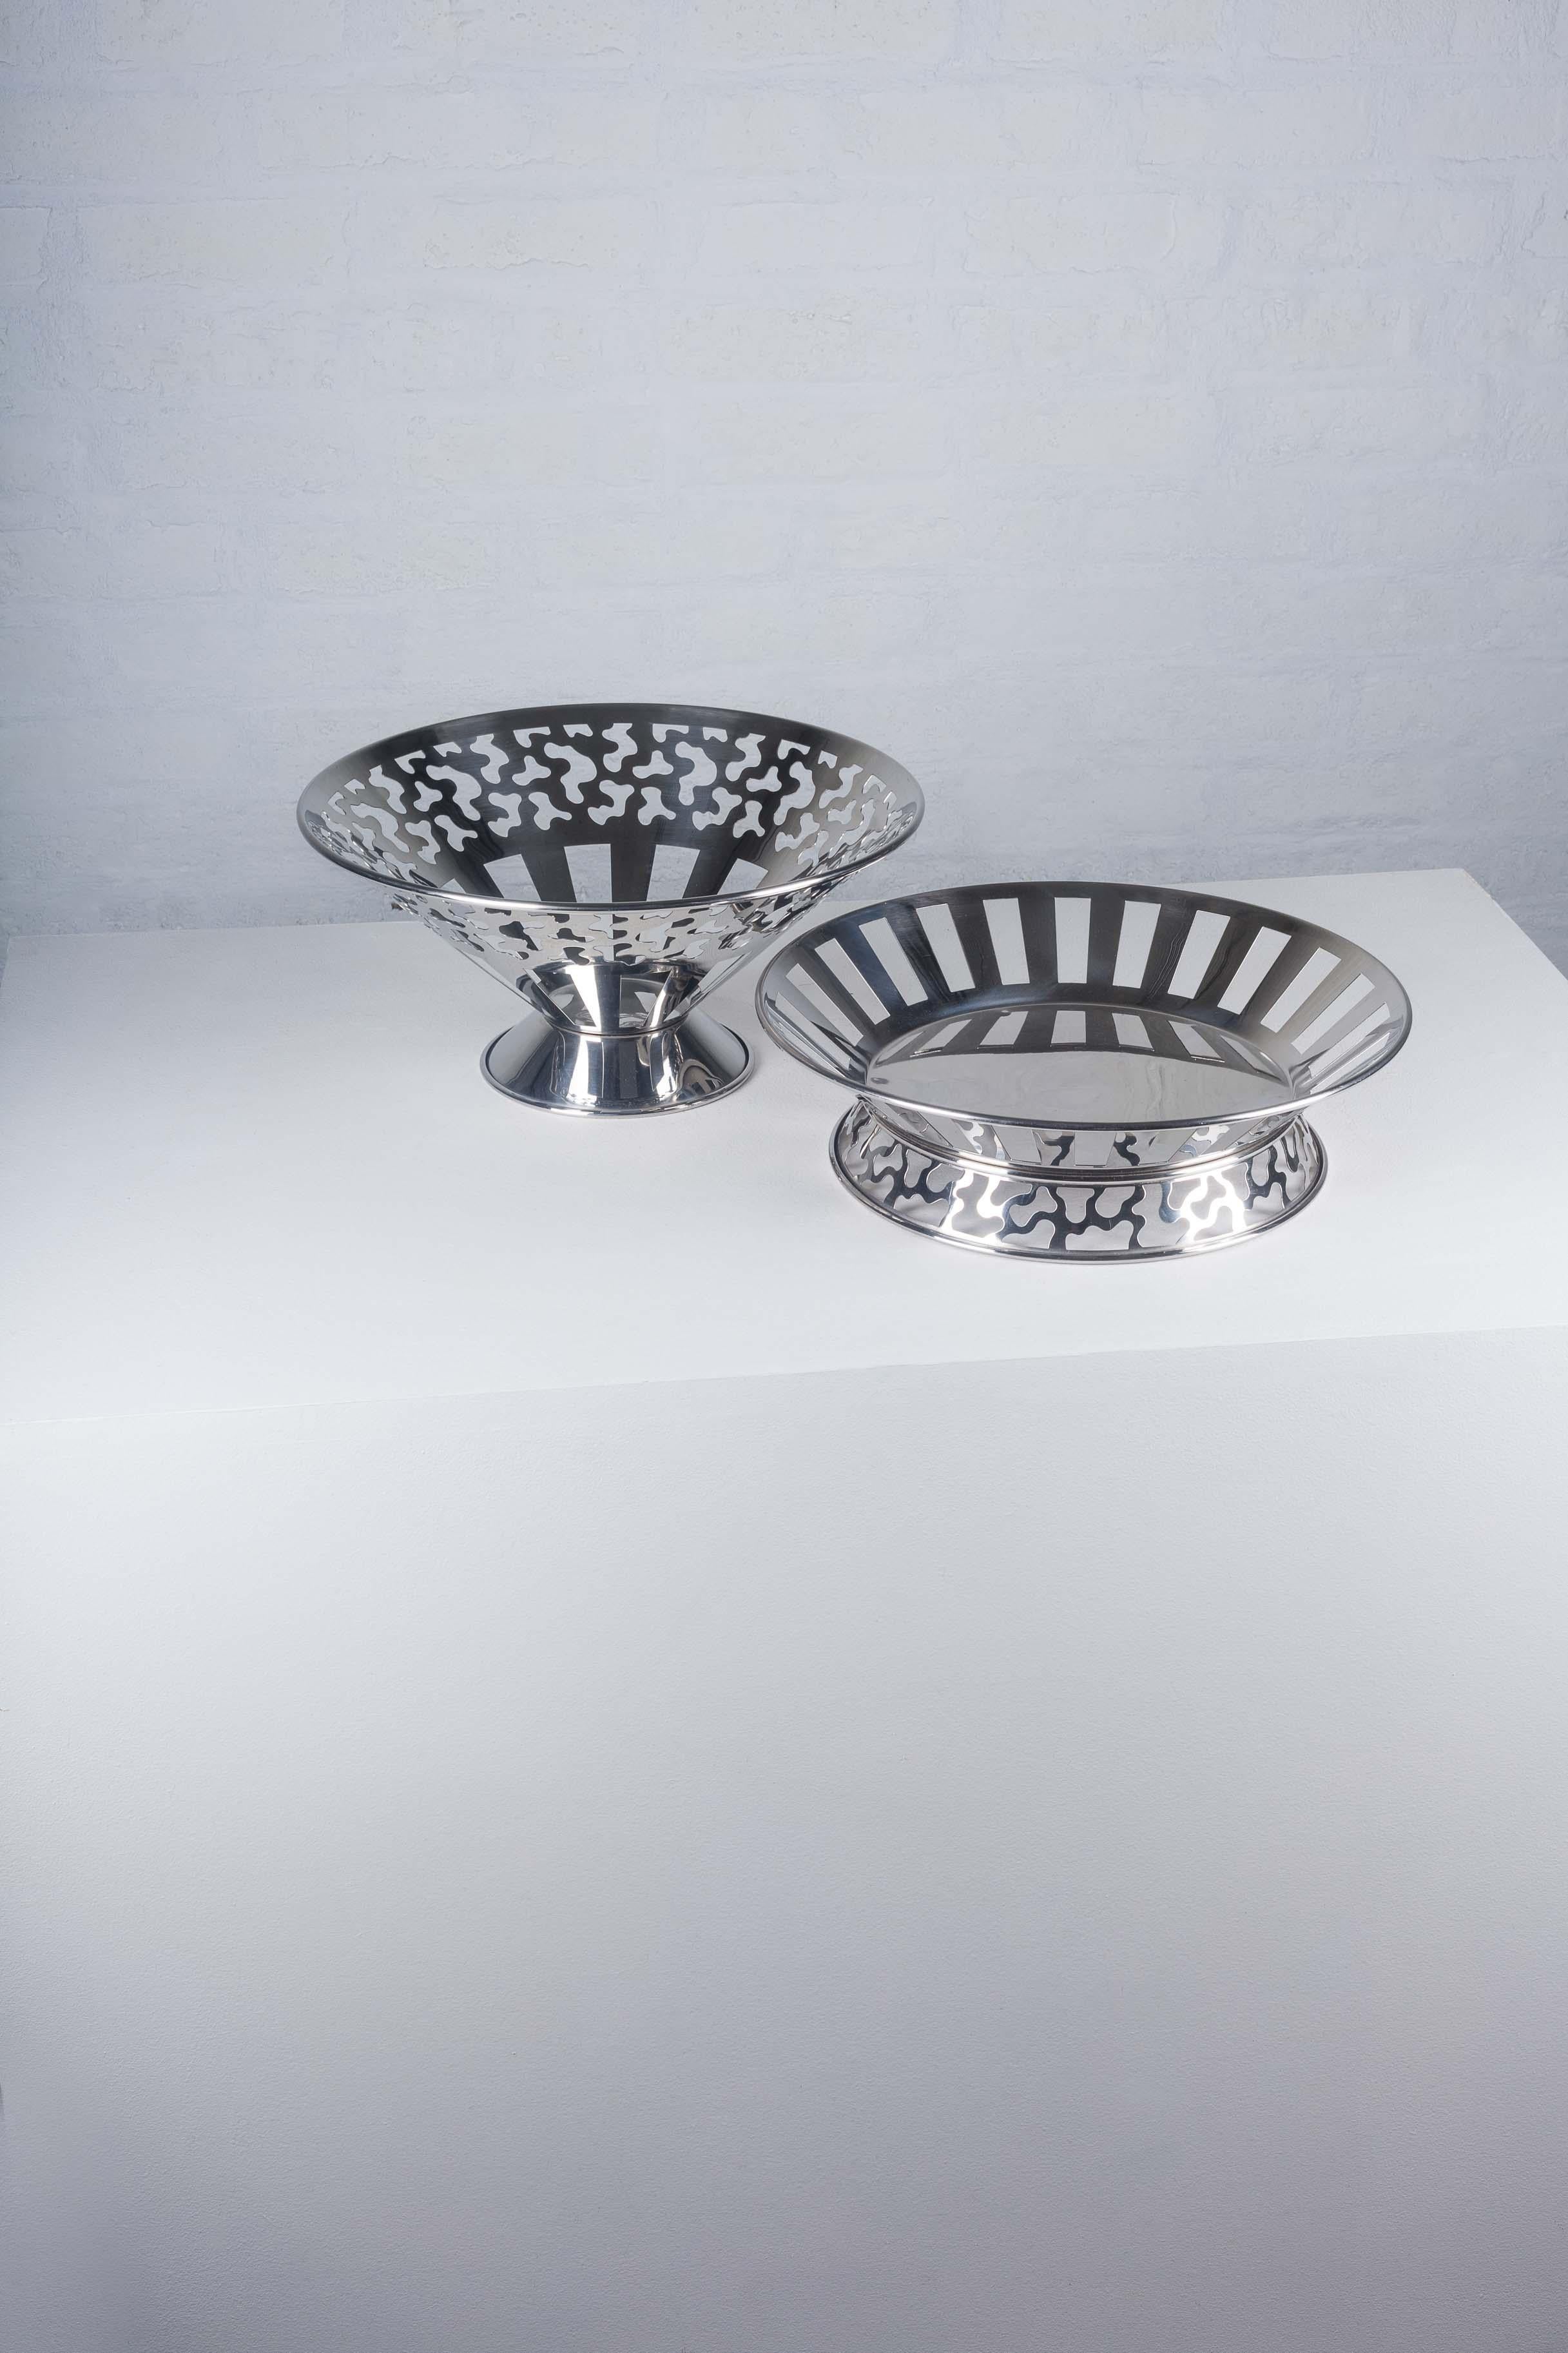 Italian Fruit Bowls by George Sowden for Bodum, Sereno I & II, 1987 For Sale